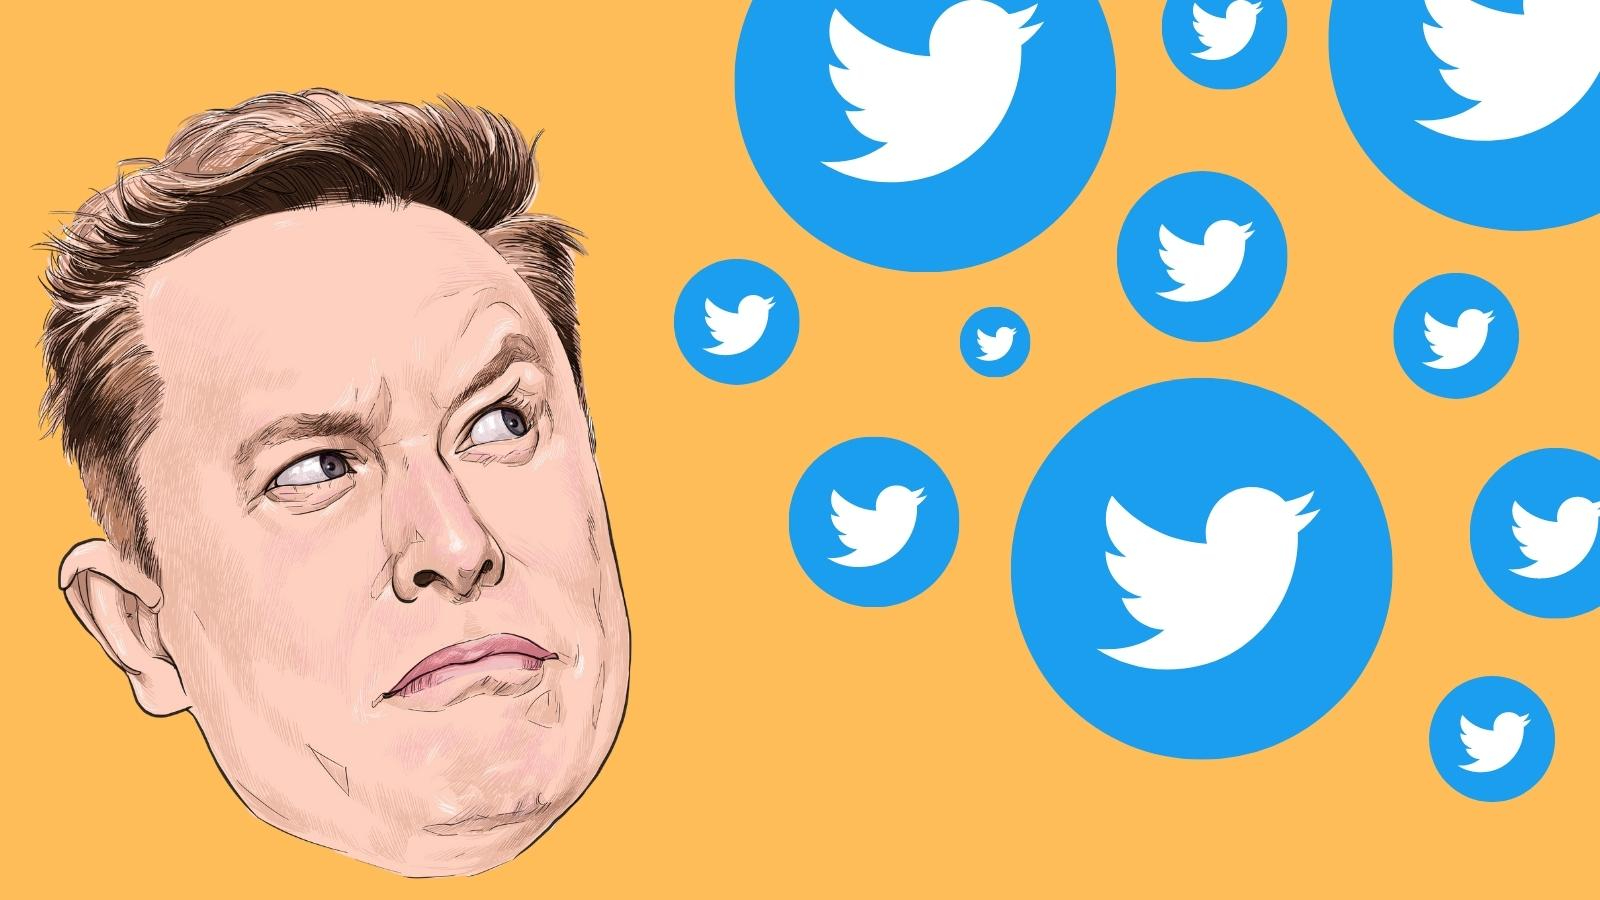 An illustration of Elon Musk drawn by thongyhod looking baffled by the downfall of Twitter logos